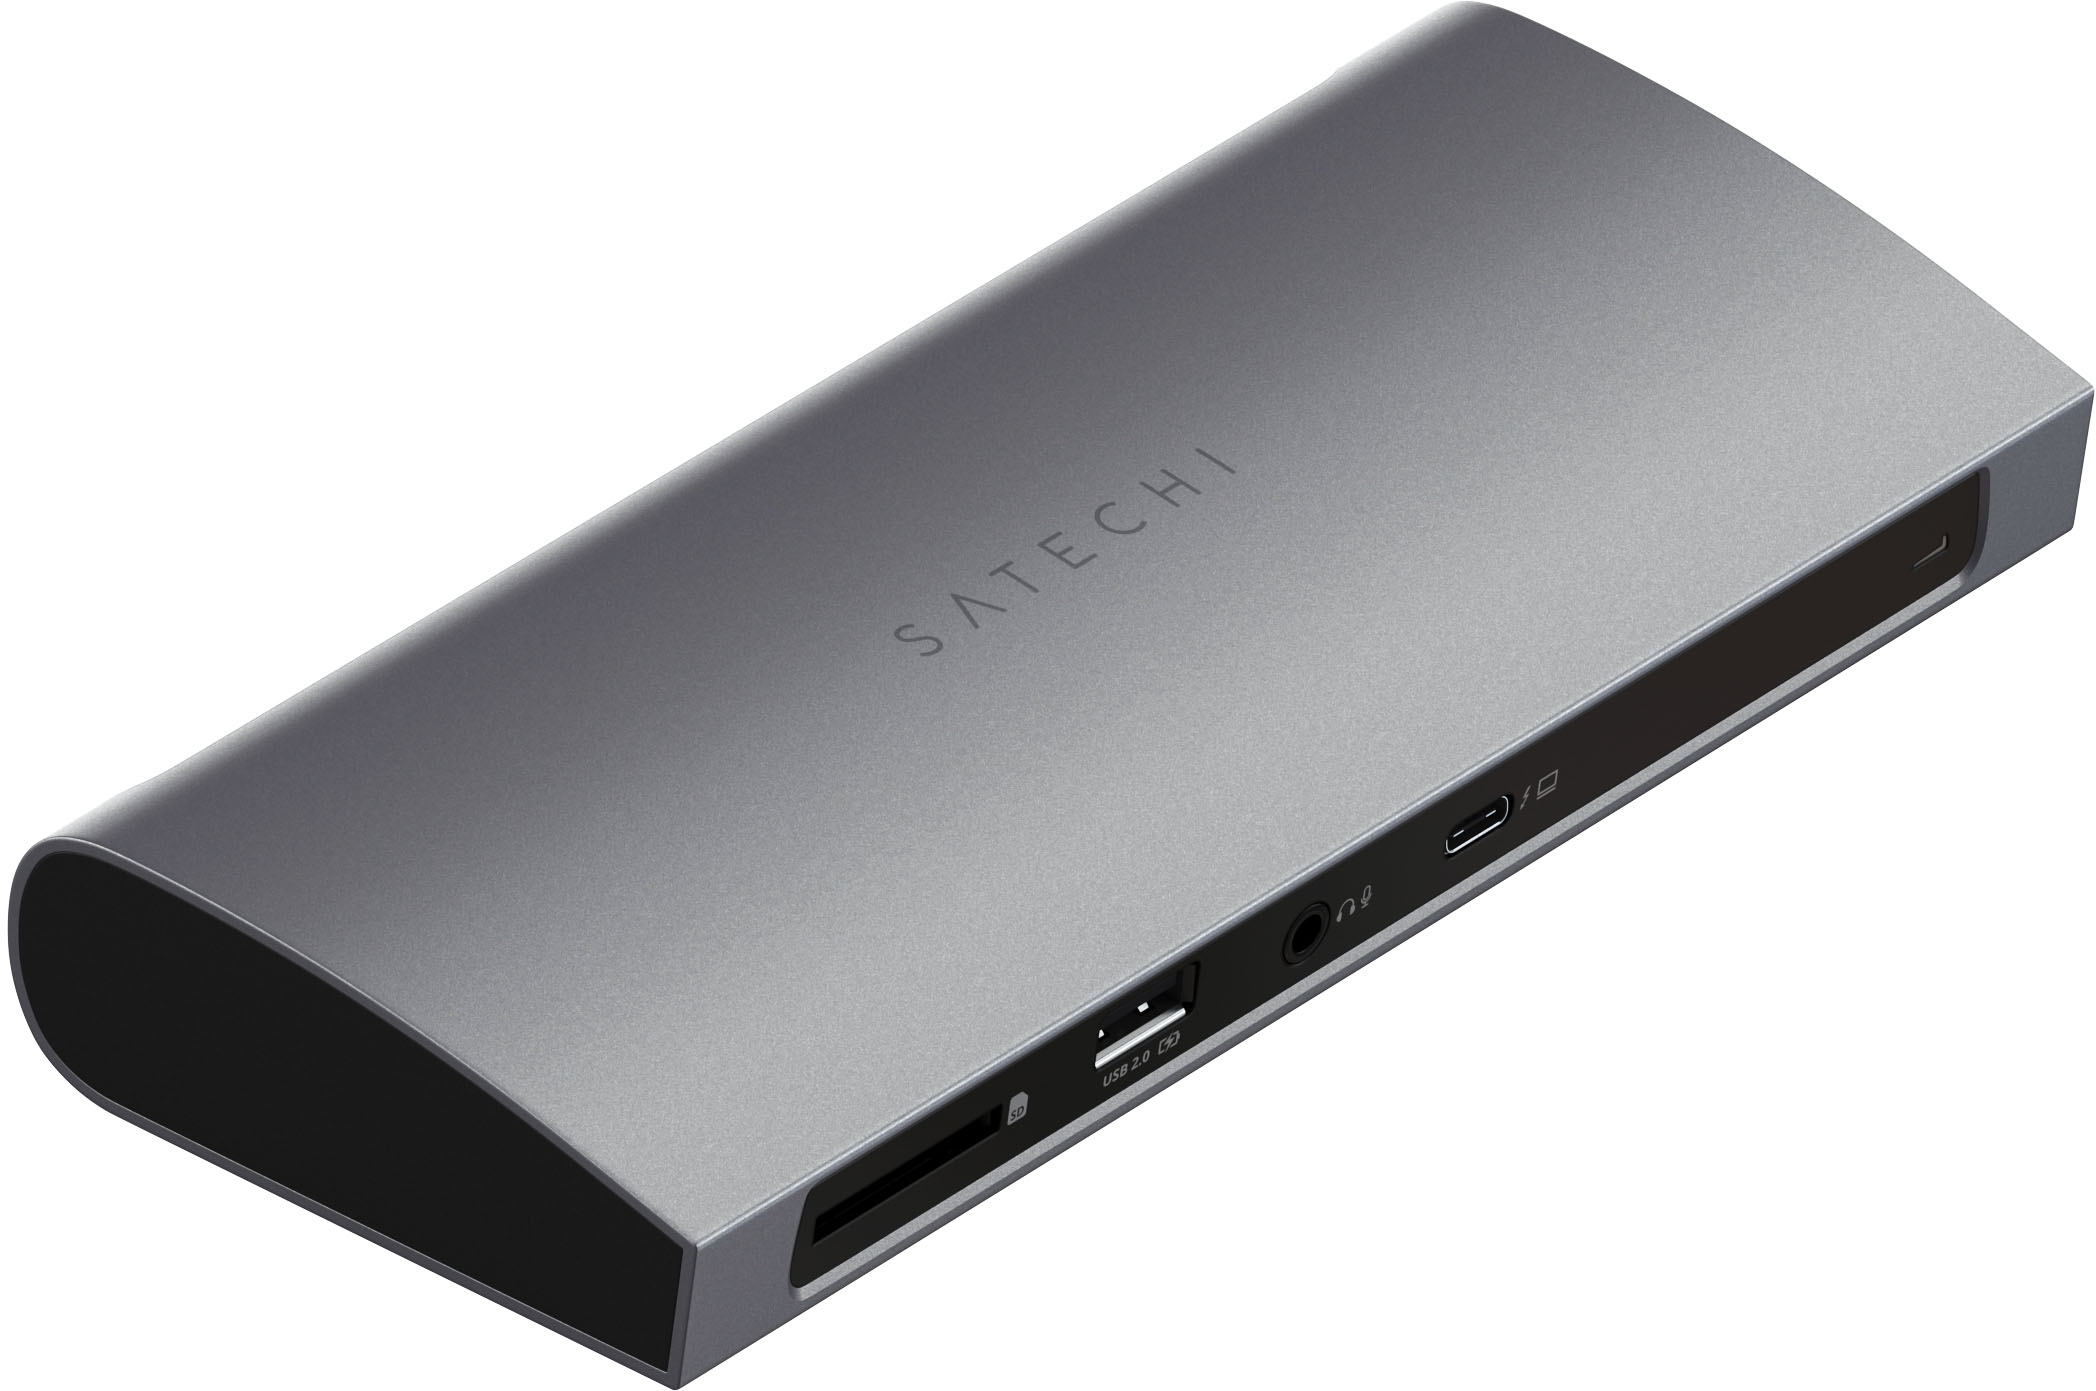 Angle View: Satechi - Thunderbolt 4 Dock - Space Gray